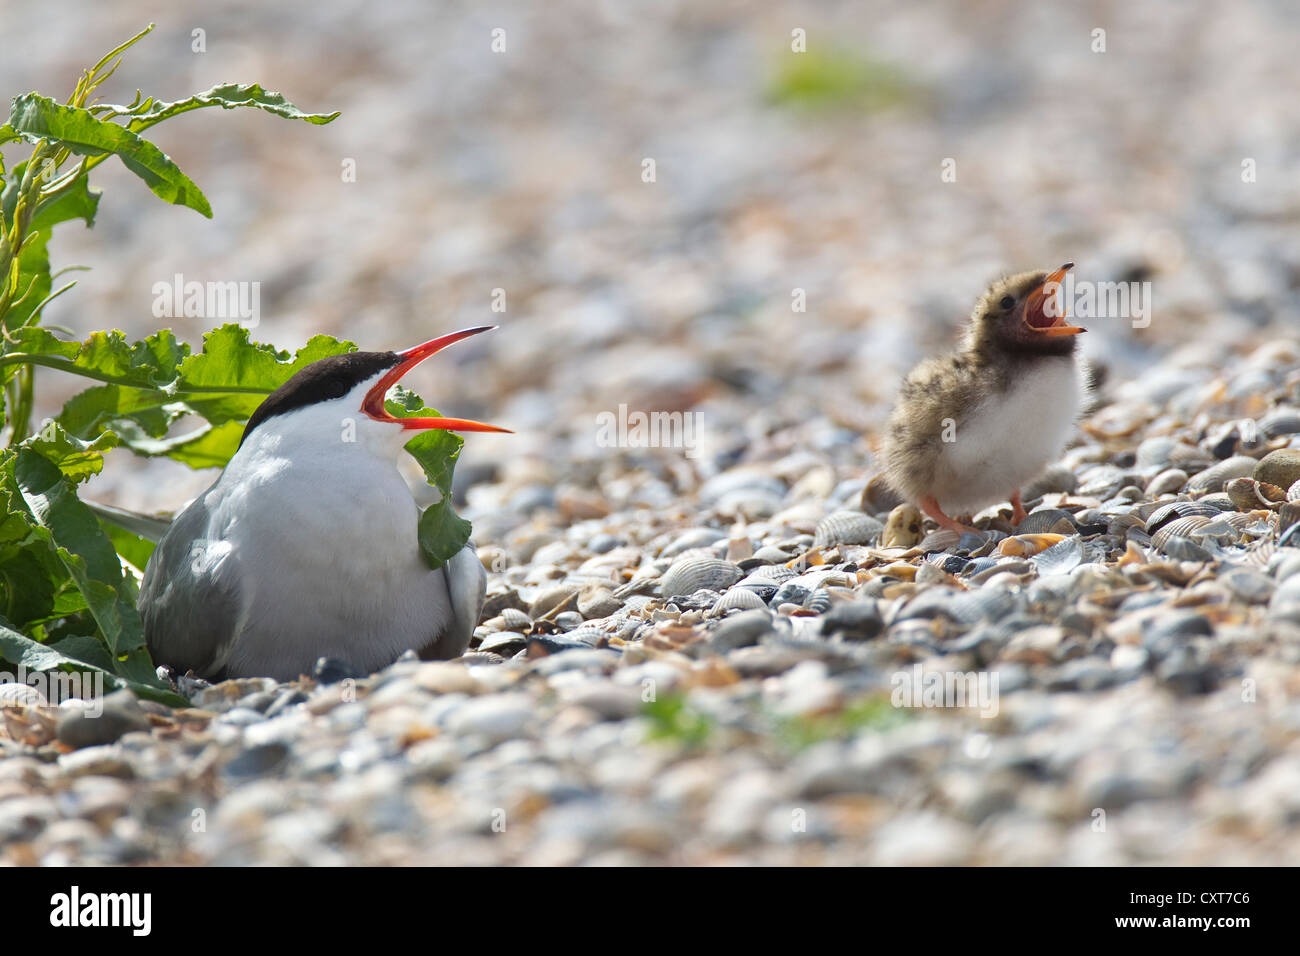 Common tern (Sterna hirundo) with a chick, Texel, the Netherlands, Europe Stock Photo